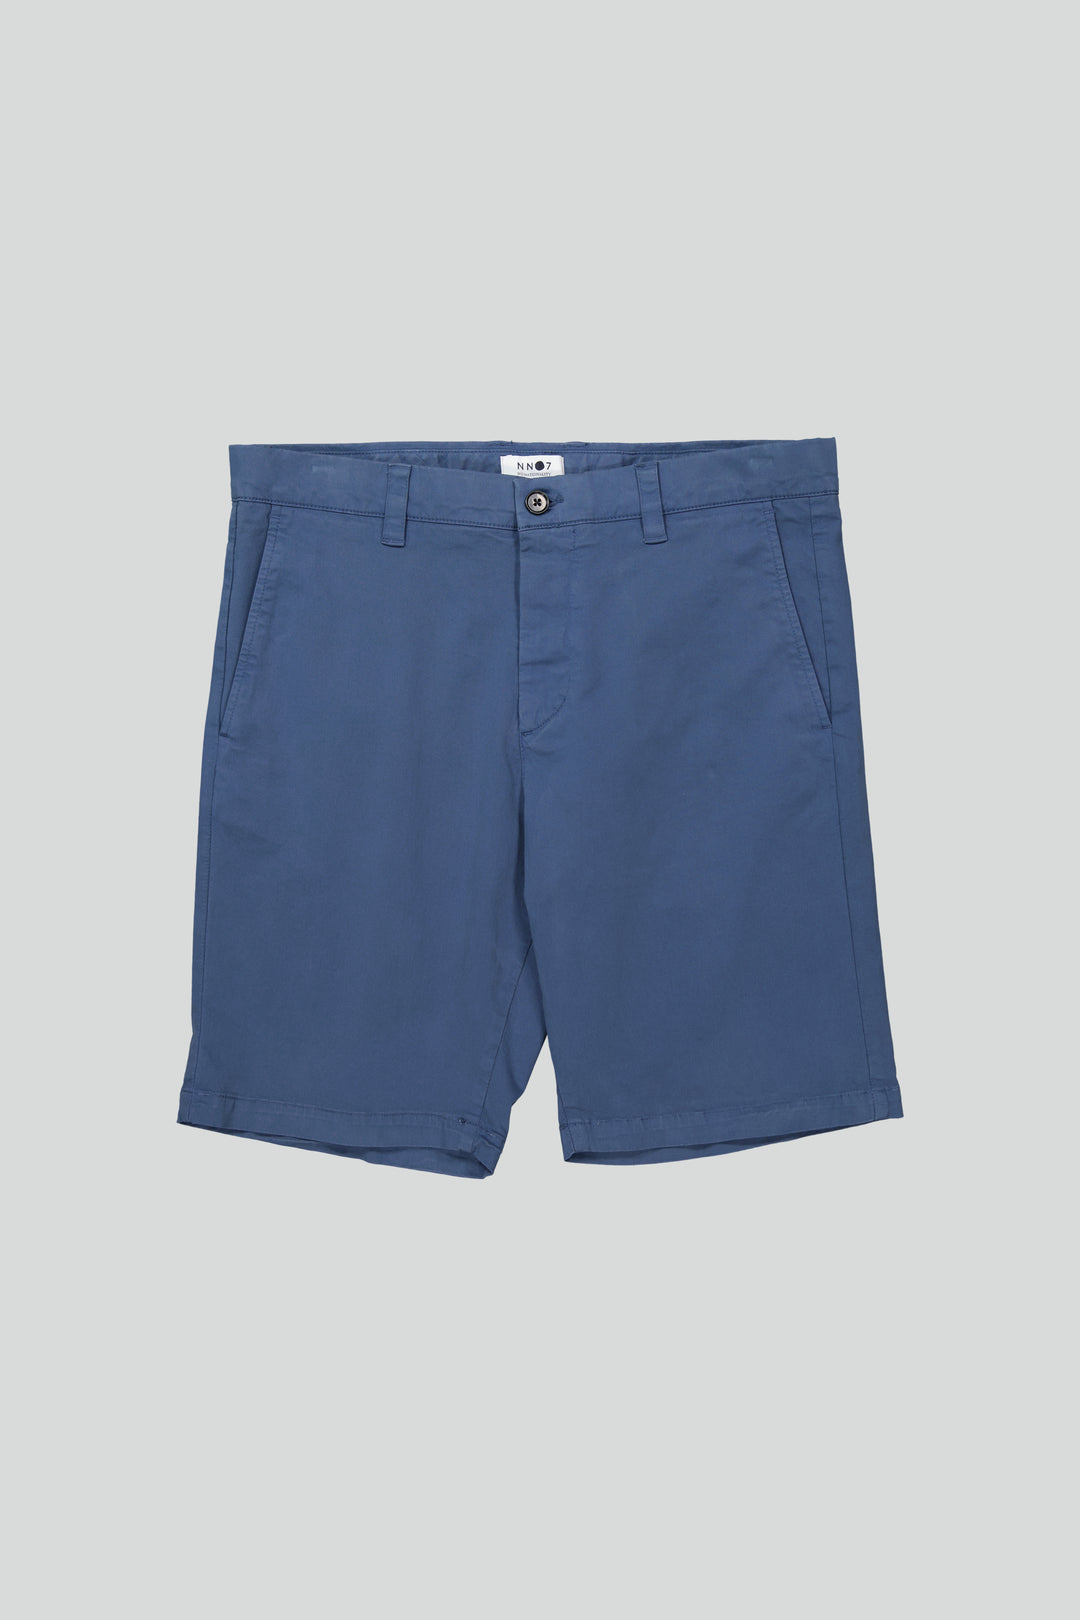 NN07 - Crown Shorts 1005 in Sargasso Sea | Buster McGee